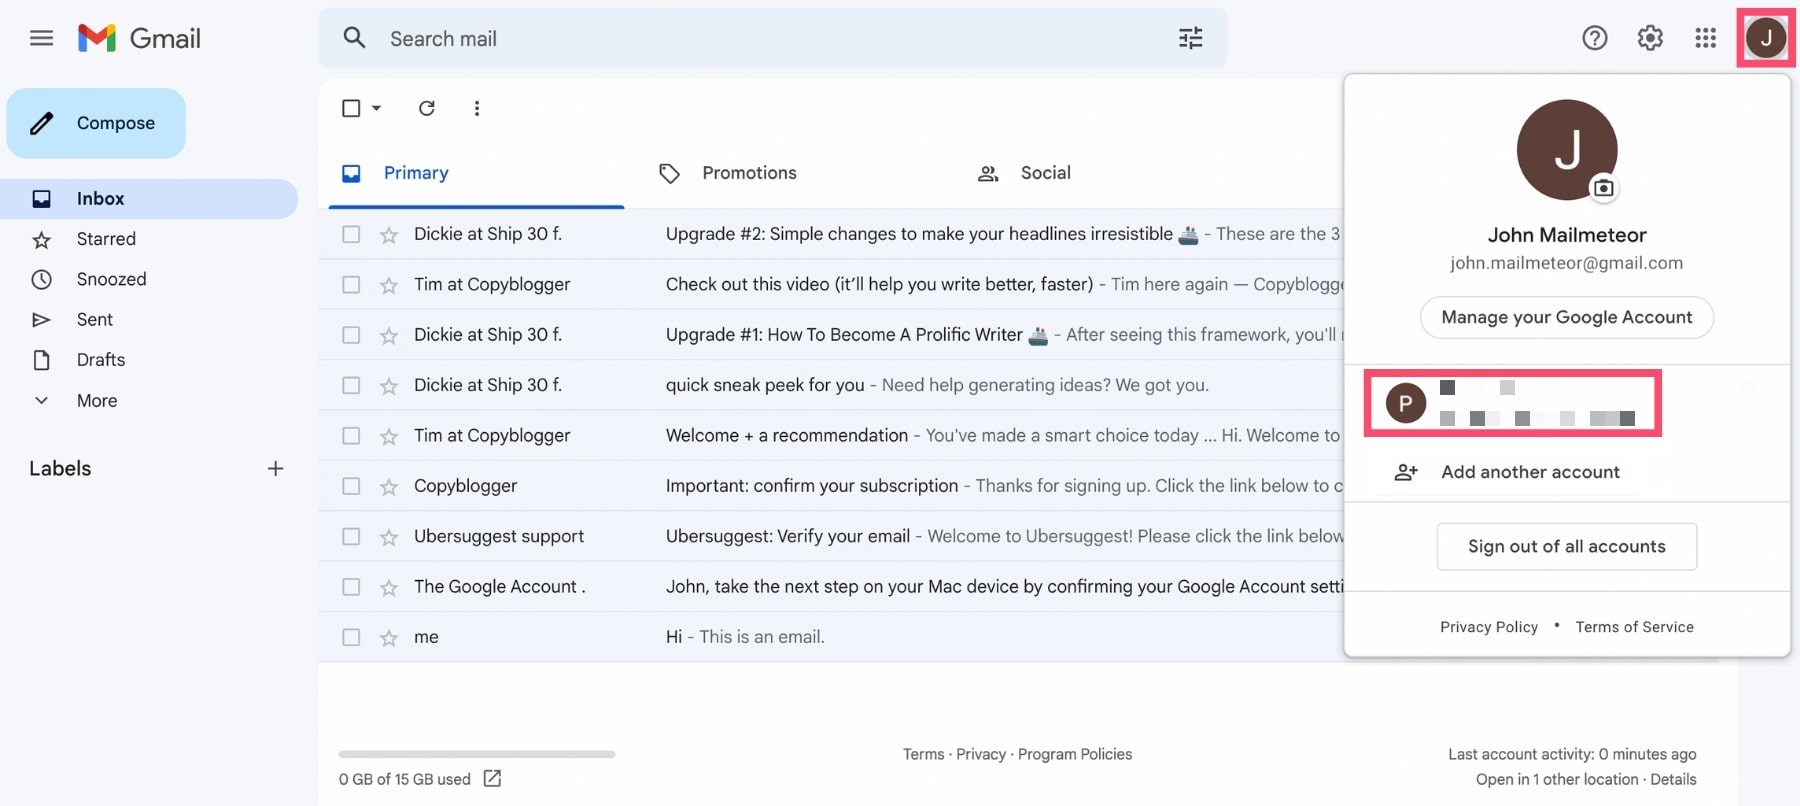 How to switch your Gmail account